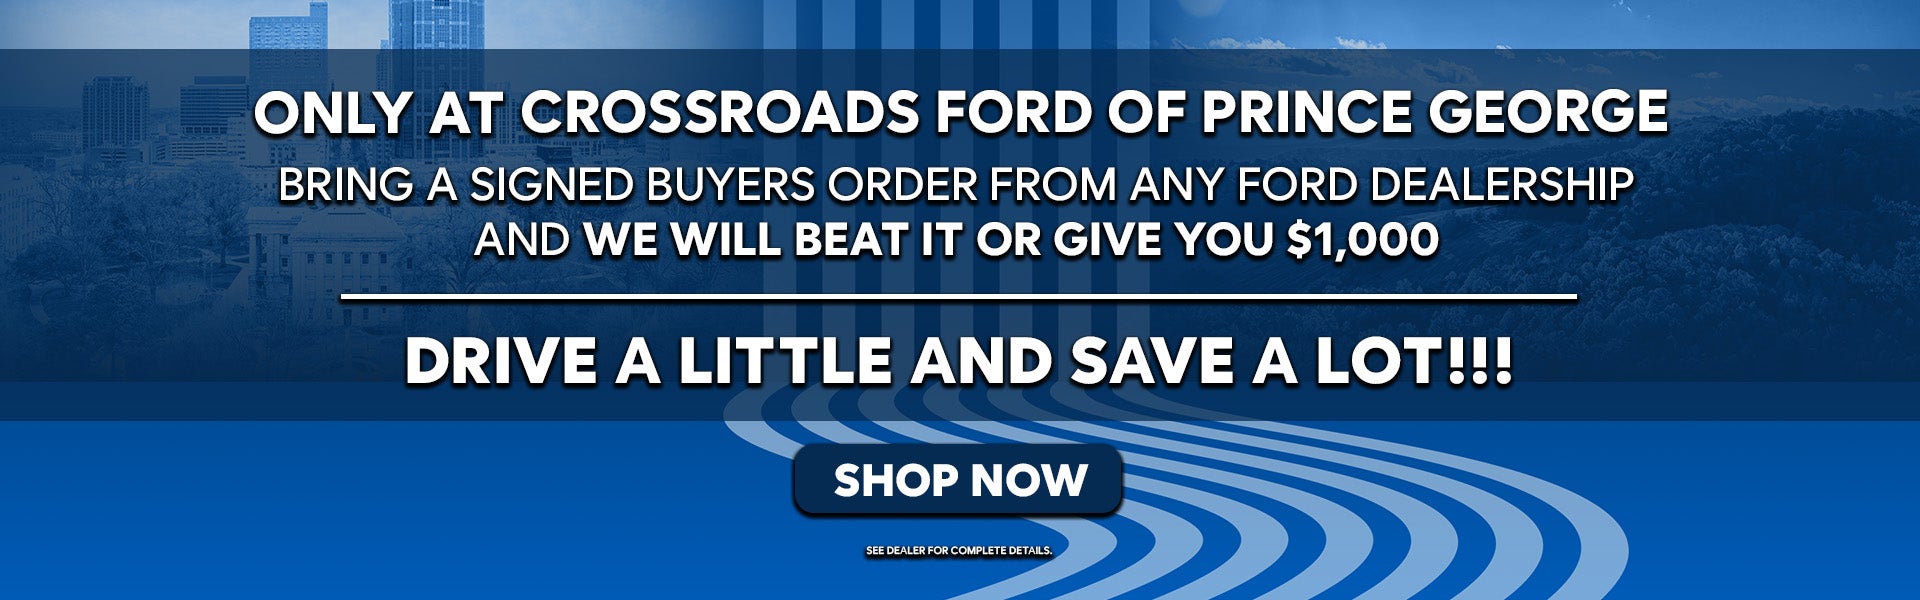 Bring A Signed Buyers Order From Any Ford Dealership